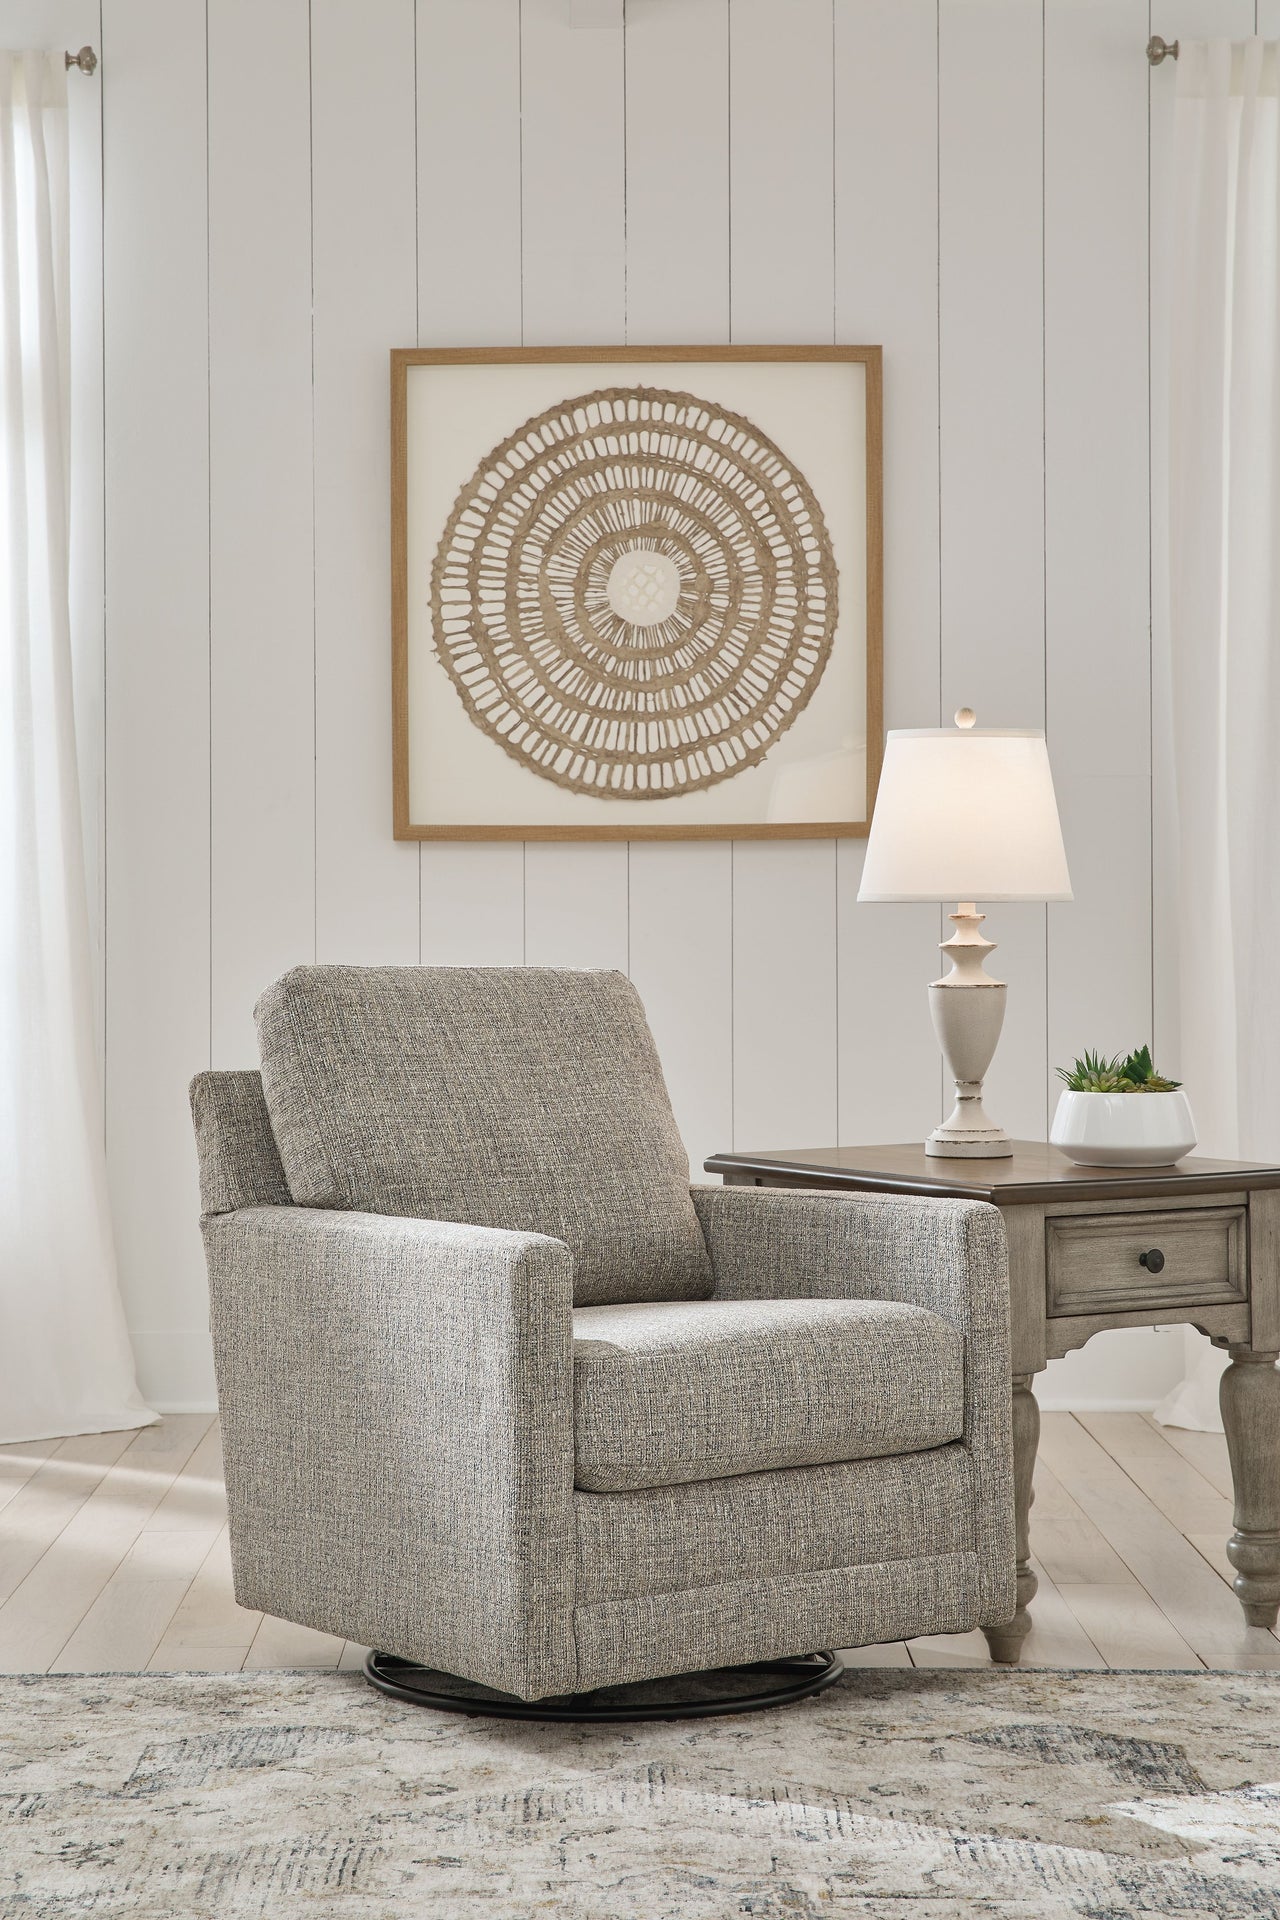 Bralynn - Linen - Swivel Glider Accent Chair Tony's Home Furnishings Furniture. Beds. Dressers. Sofas.